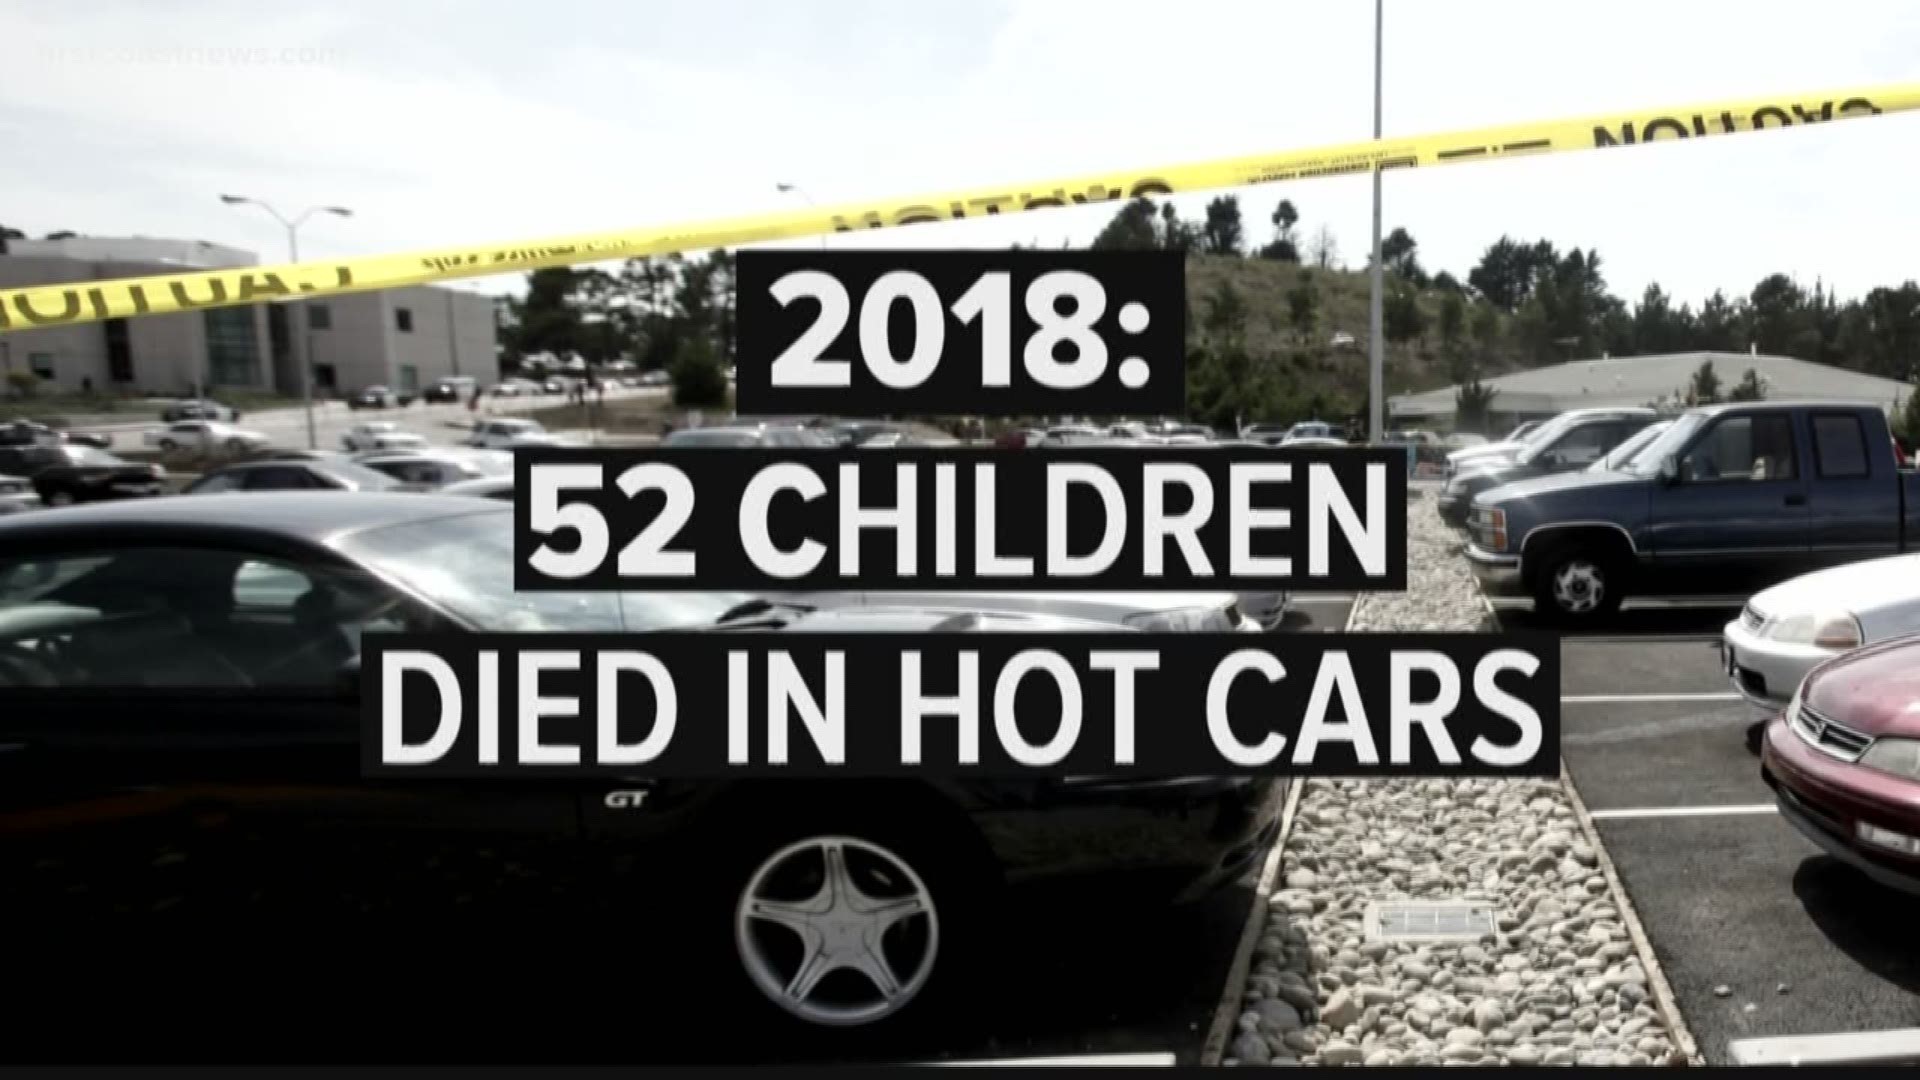 This Summer Kids and Cars had legislation introduced in congress to create the Hot Cars Act.